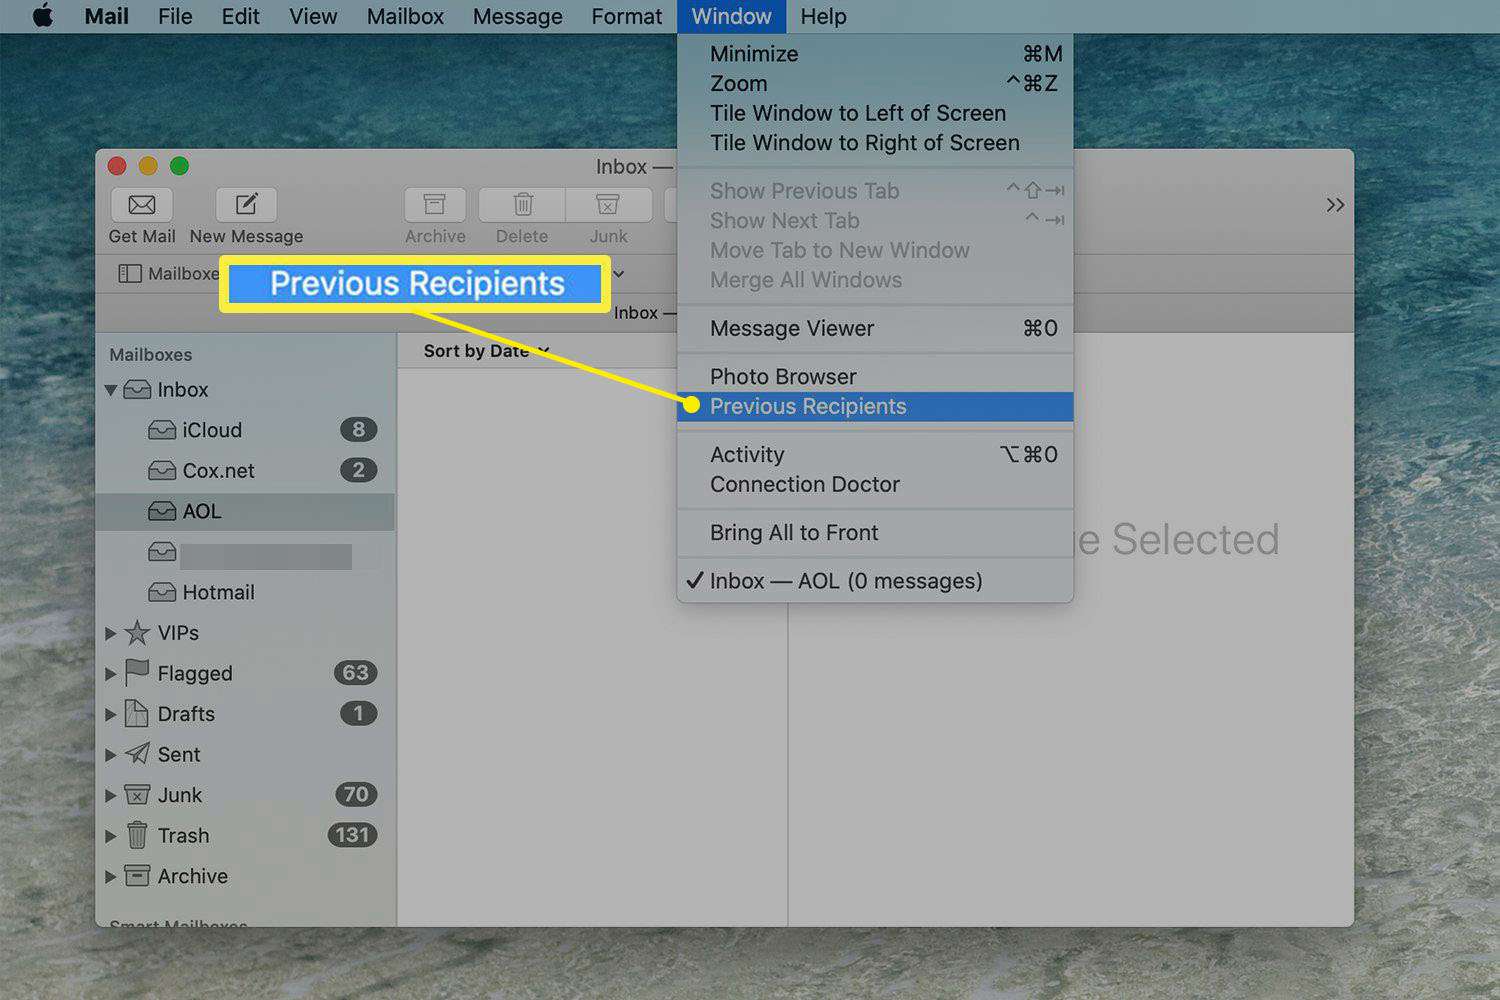 mailing list software for mac